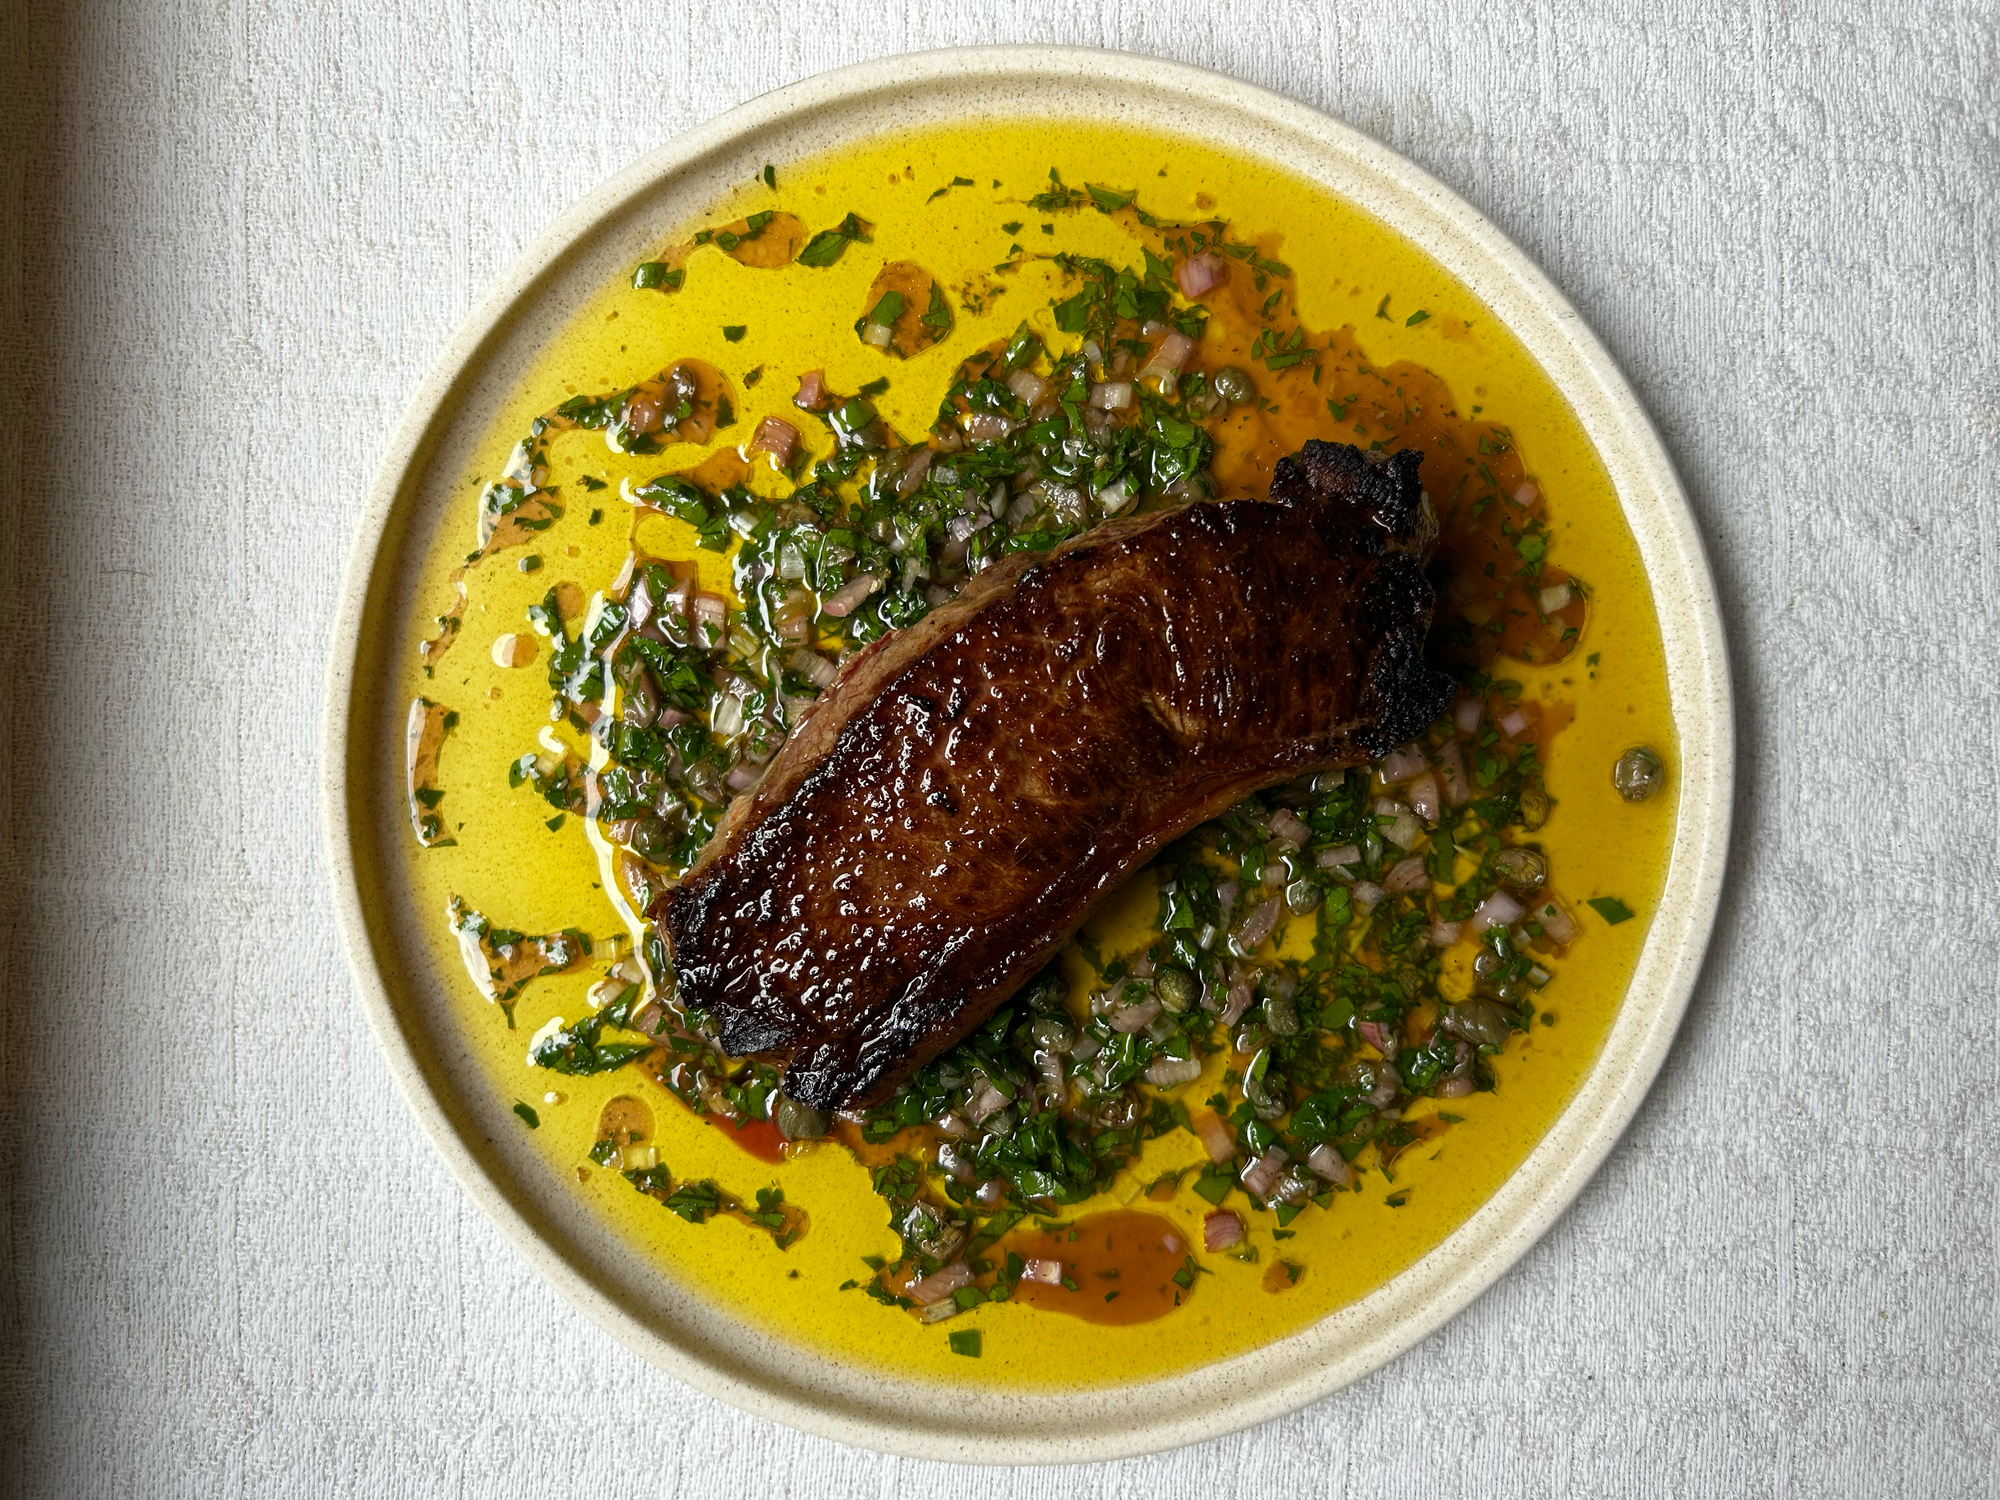 Steak with Caper and Shallot Dressing